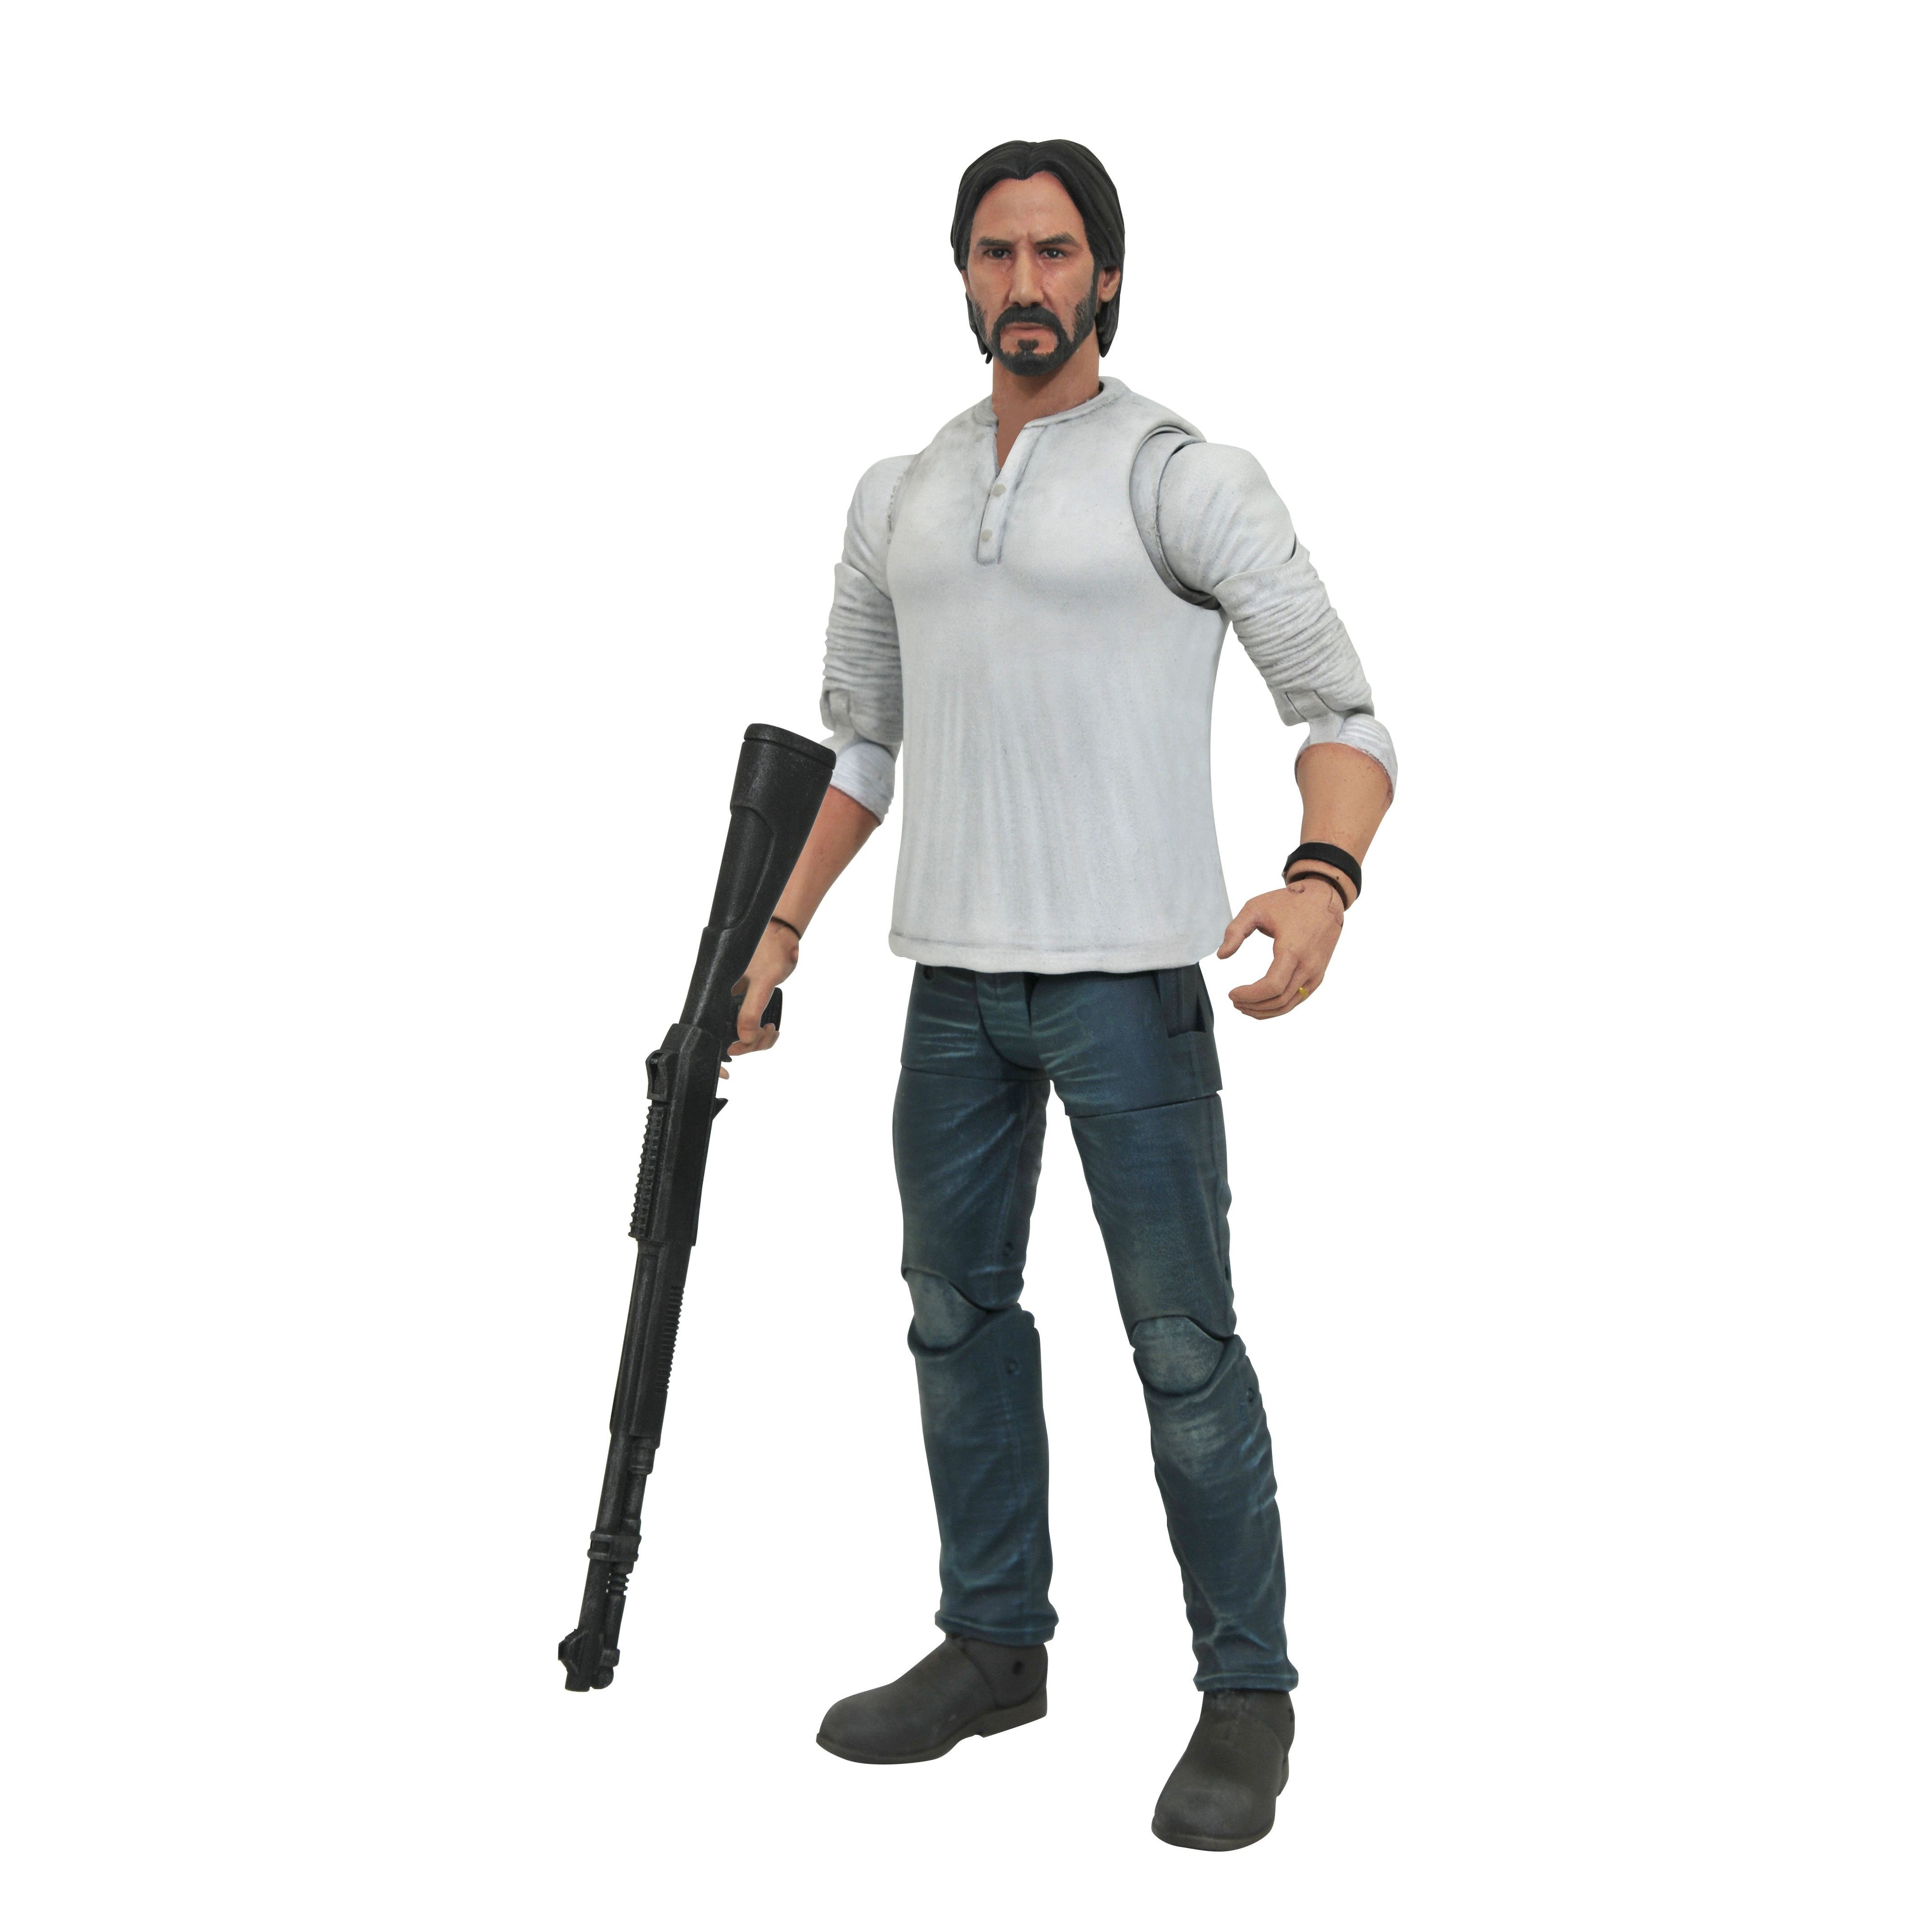 Image of John Wick 3 Select Casual Figure - AUGUST 2020